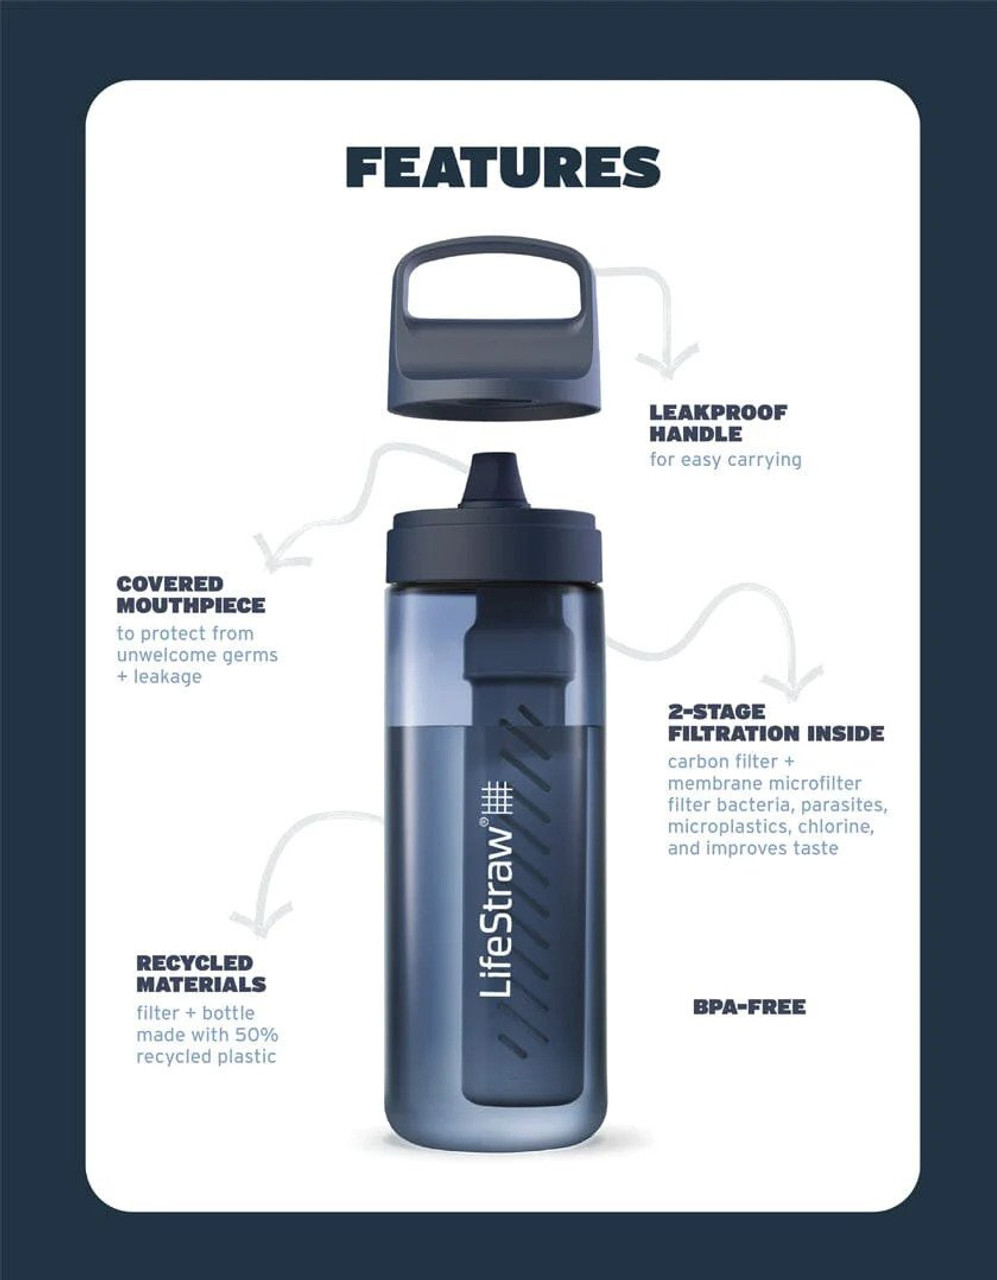 https://cdn11.bigcommerce.com/s-ovptlwt64t/images/stencil/1280x1280/products/857/4027/LIFESTRAW-GO-SERIES-22OZ-4__87565.1683079488.jpg?c=1?imbypass=on